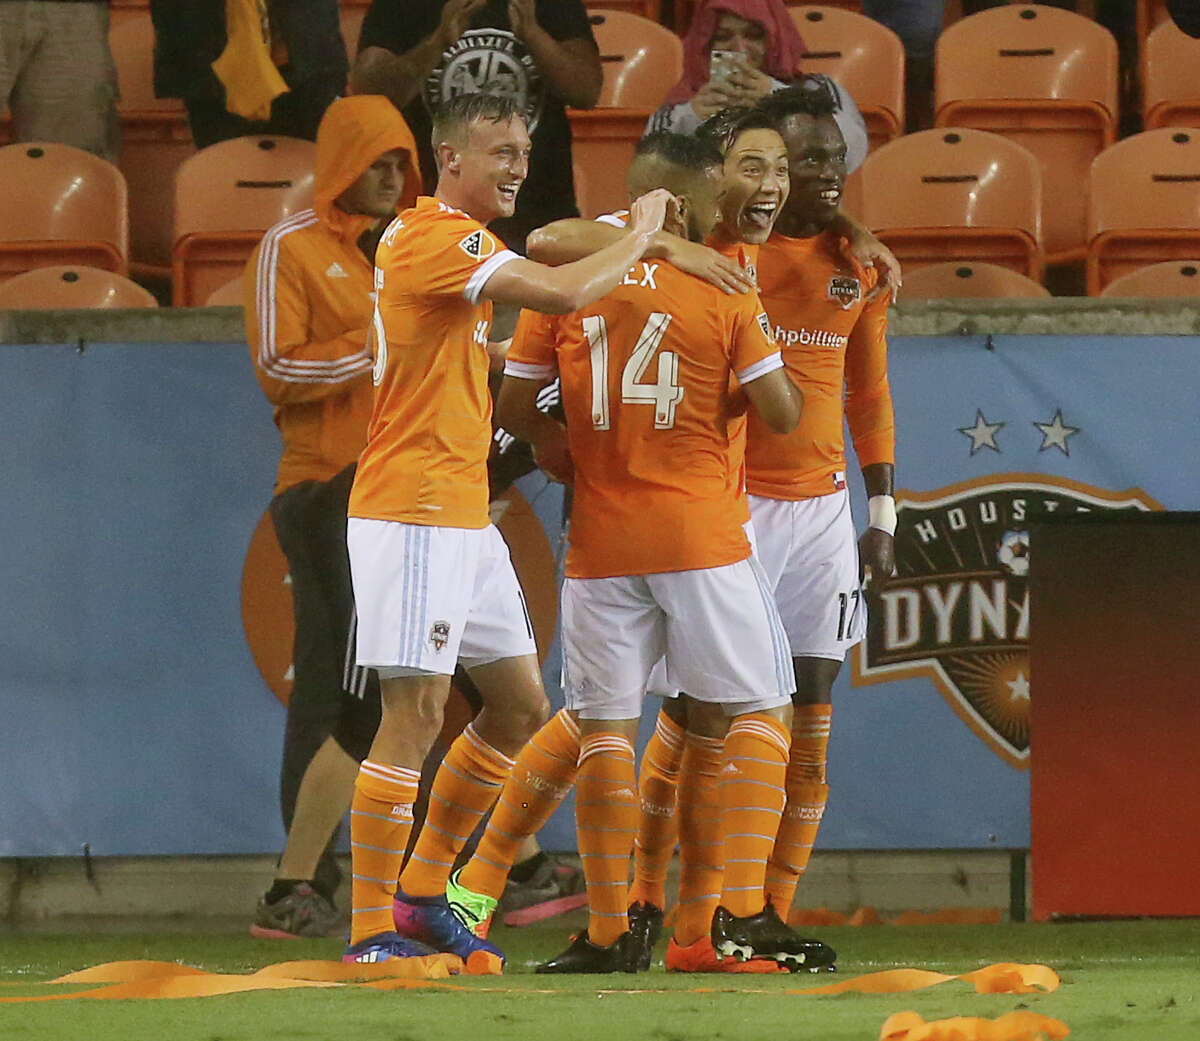 Houston Dynamo forward Erick Torres (9) and teammates celebrate his score during the second half of the MLS soccer game against the Columbus Crew at BBVA Compass Stadium Saturday, March 11, 2017, in Houston. The Dynamos defeated the Crew 3-1. ( Yi-Chin Lee / Houston Chronicle )